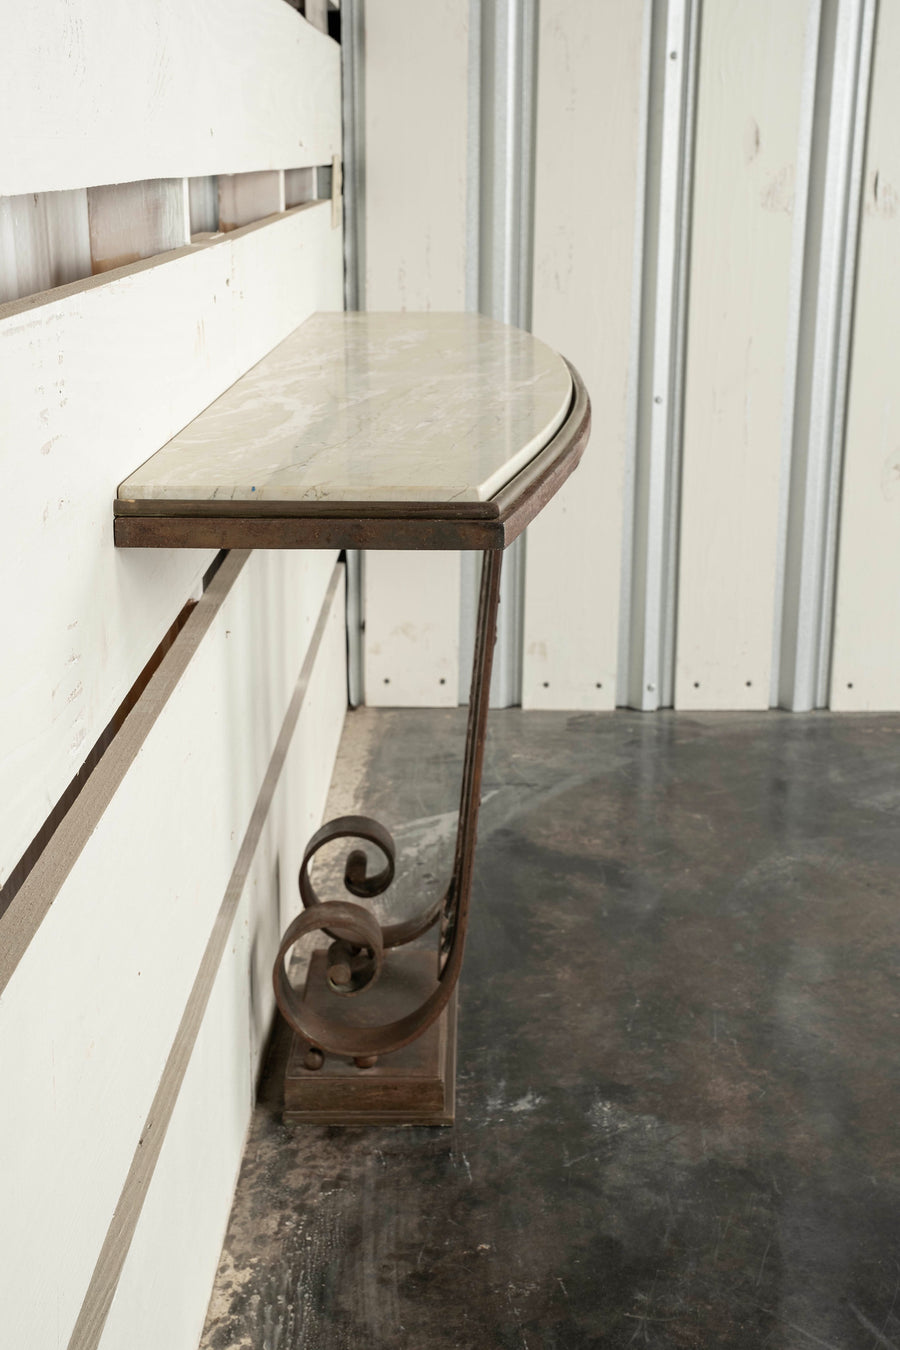 French Art Deco Iron Marble Console